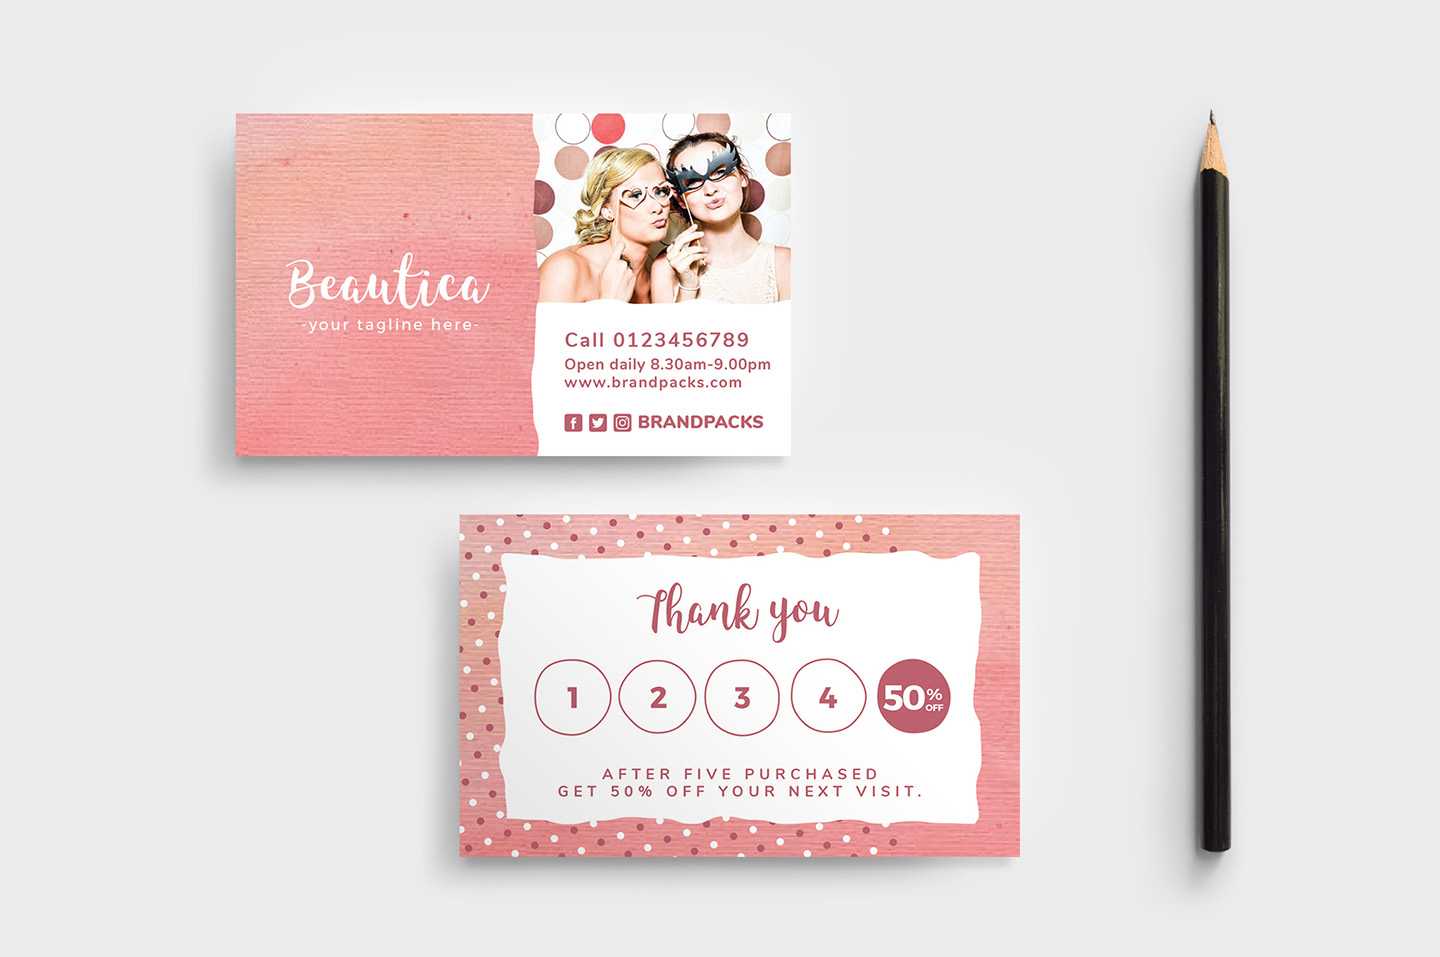 Free Loyalty Card Templates - Psd, Ai & Vector - Brandpacks Pertaining To Loyalty Card Design Template